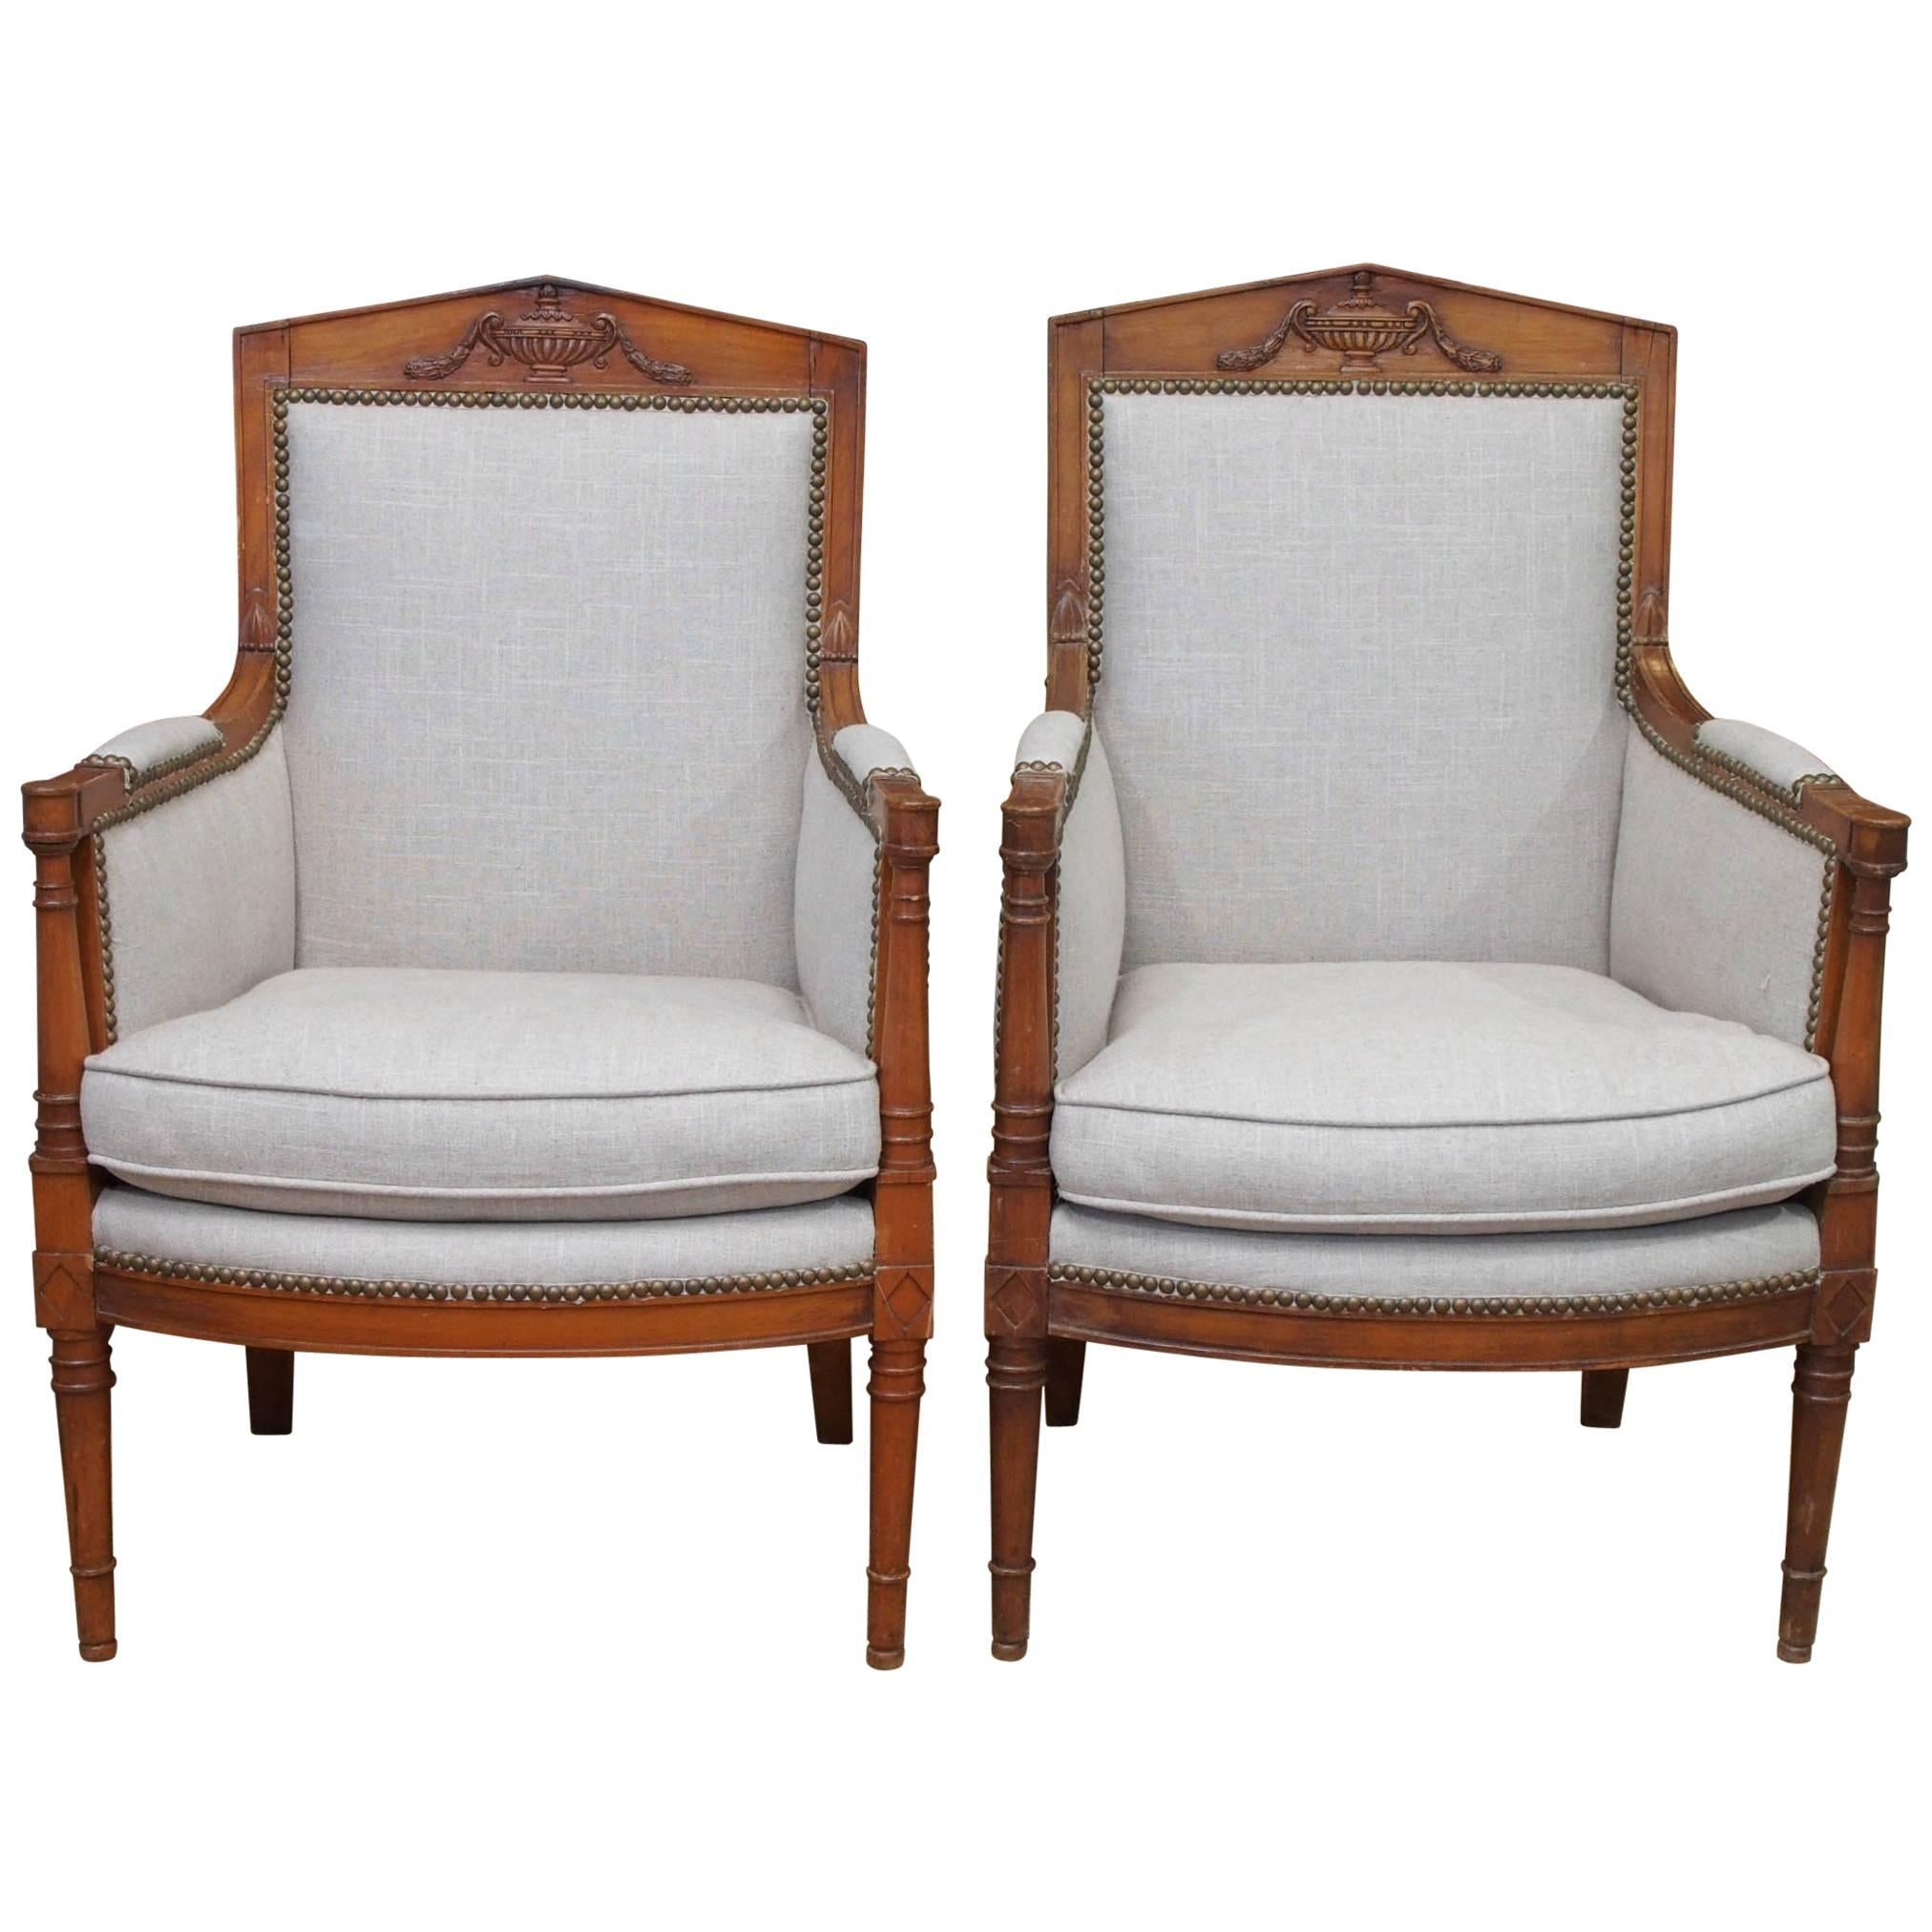 Pair of French Empire Bergere Chairs